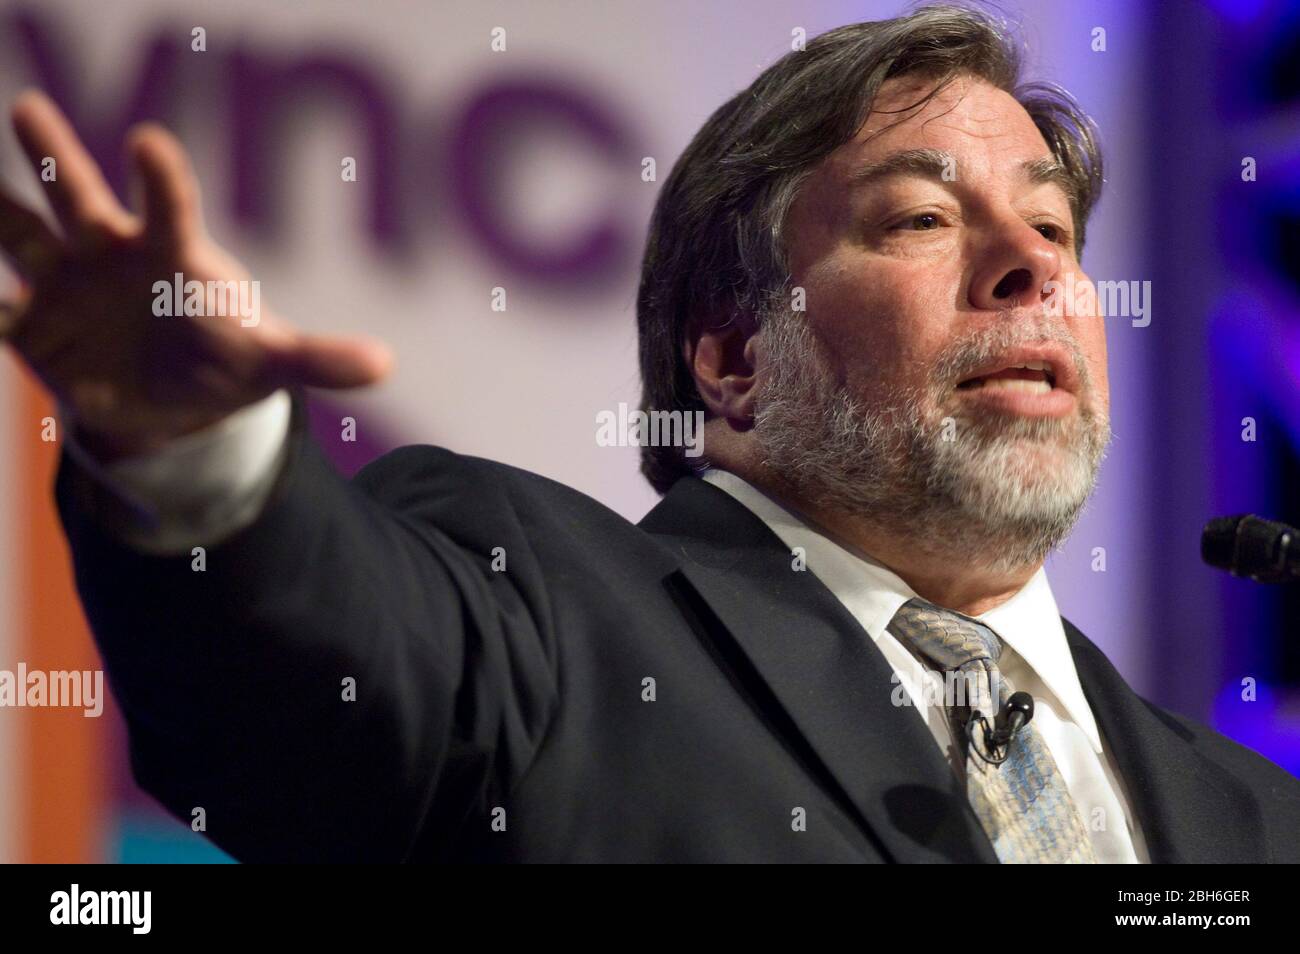 San Antonio, Texas USA,  April 16, 2009: Tech legend Steve Wozniak,  recalling his experiences growing up in California and co-founding Apple Computers with Steve Jobs in the 1980's, speaks before a trade association in San Antonio.   ©Bob Daemmrich Stock Photo